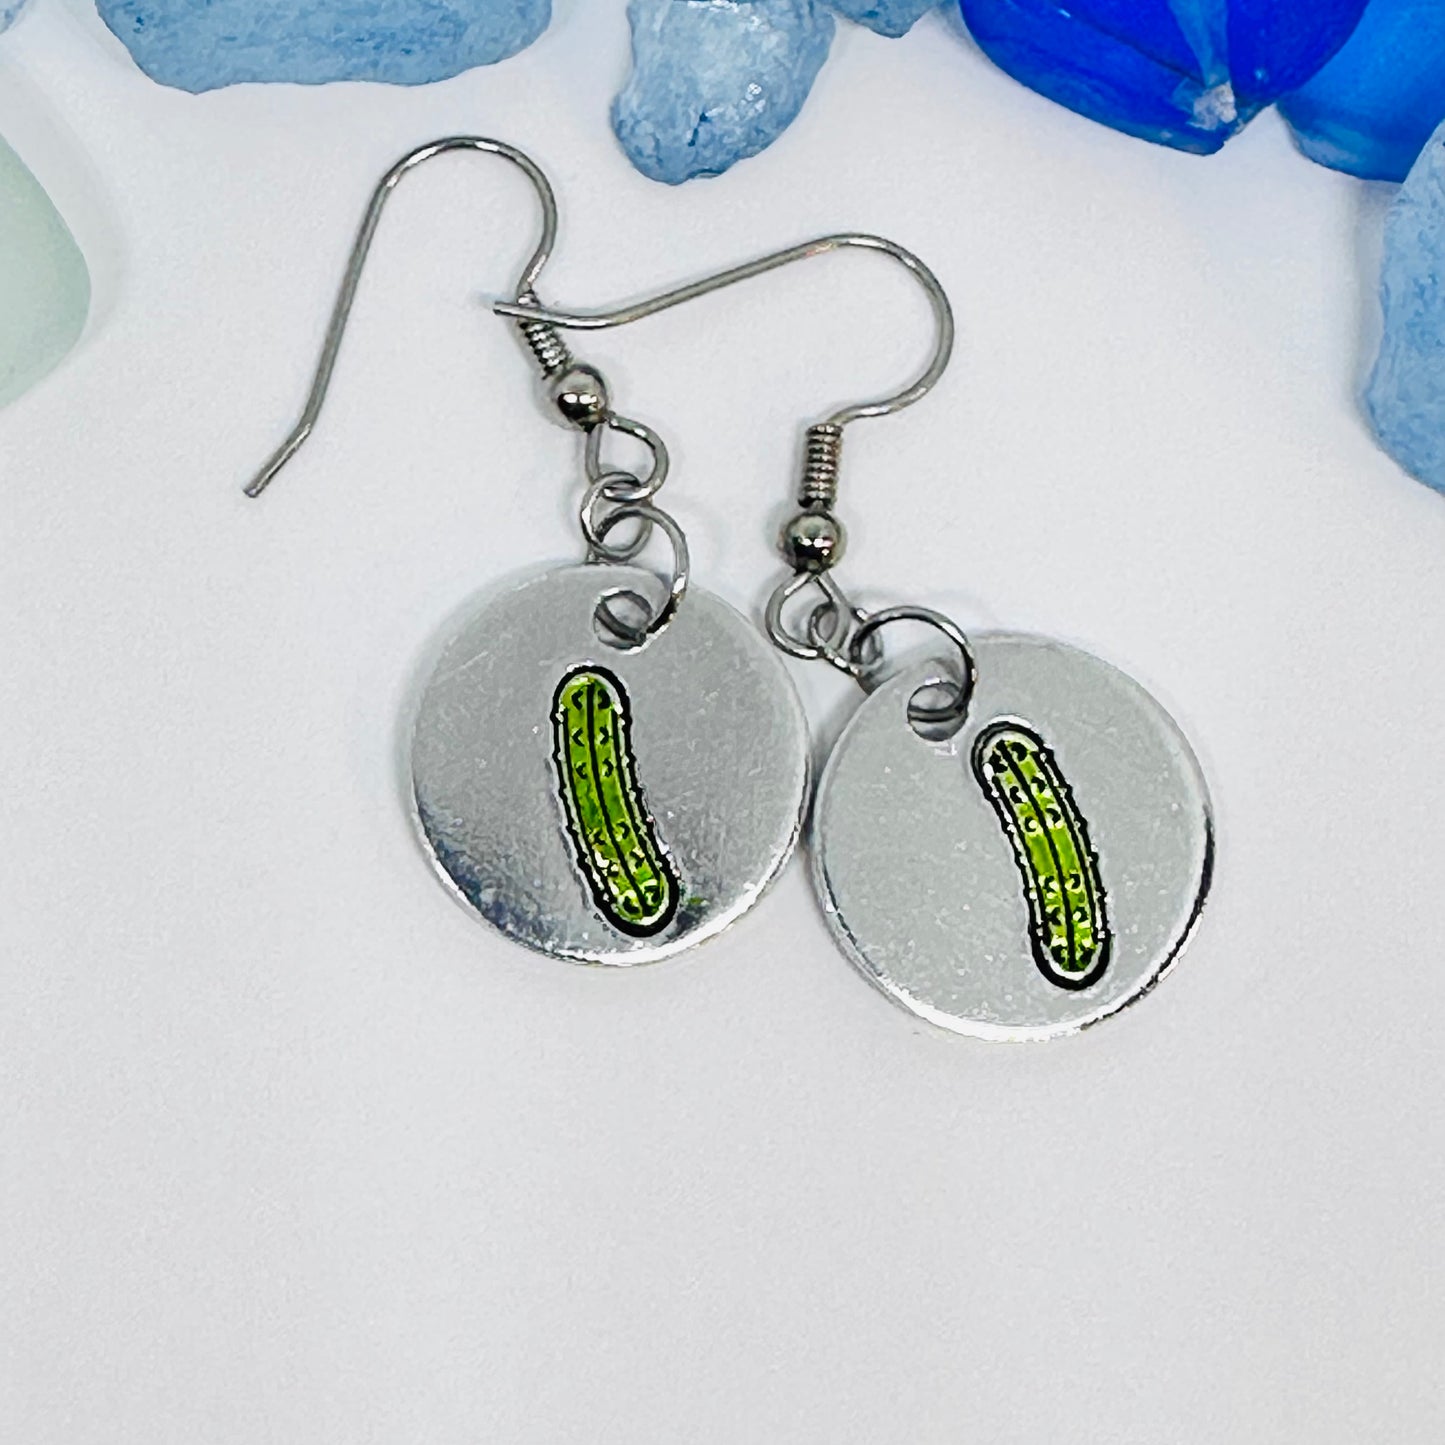 Pickles Hand Stamped & Painted Oval Drop Earrings | Green Pickles on Surgical Steel Ear Wires | Pickle Fest | Picklelicious